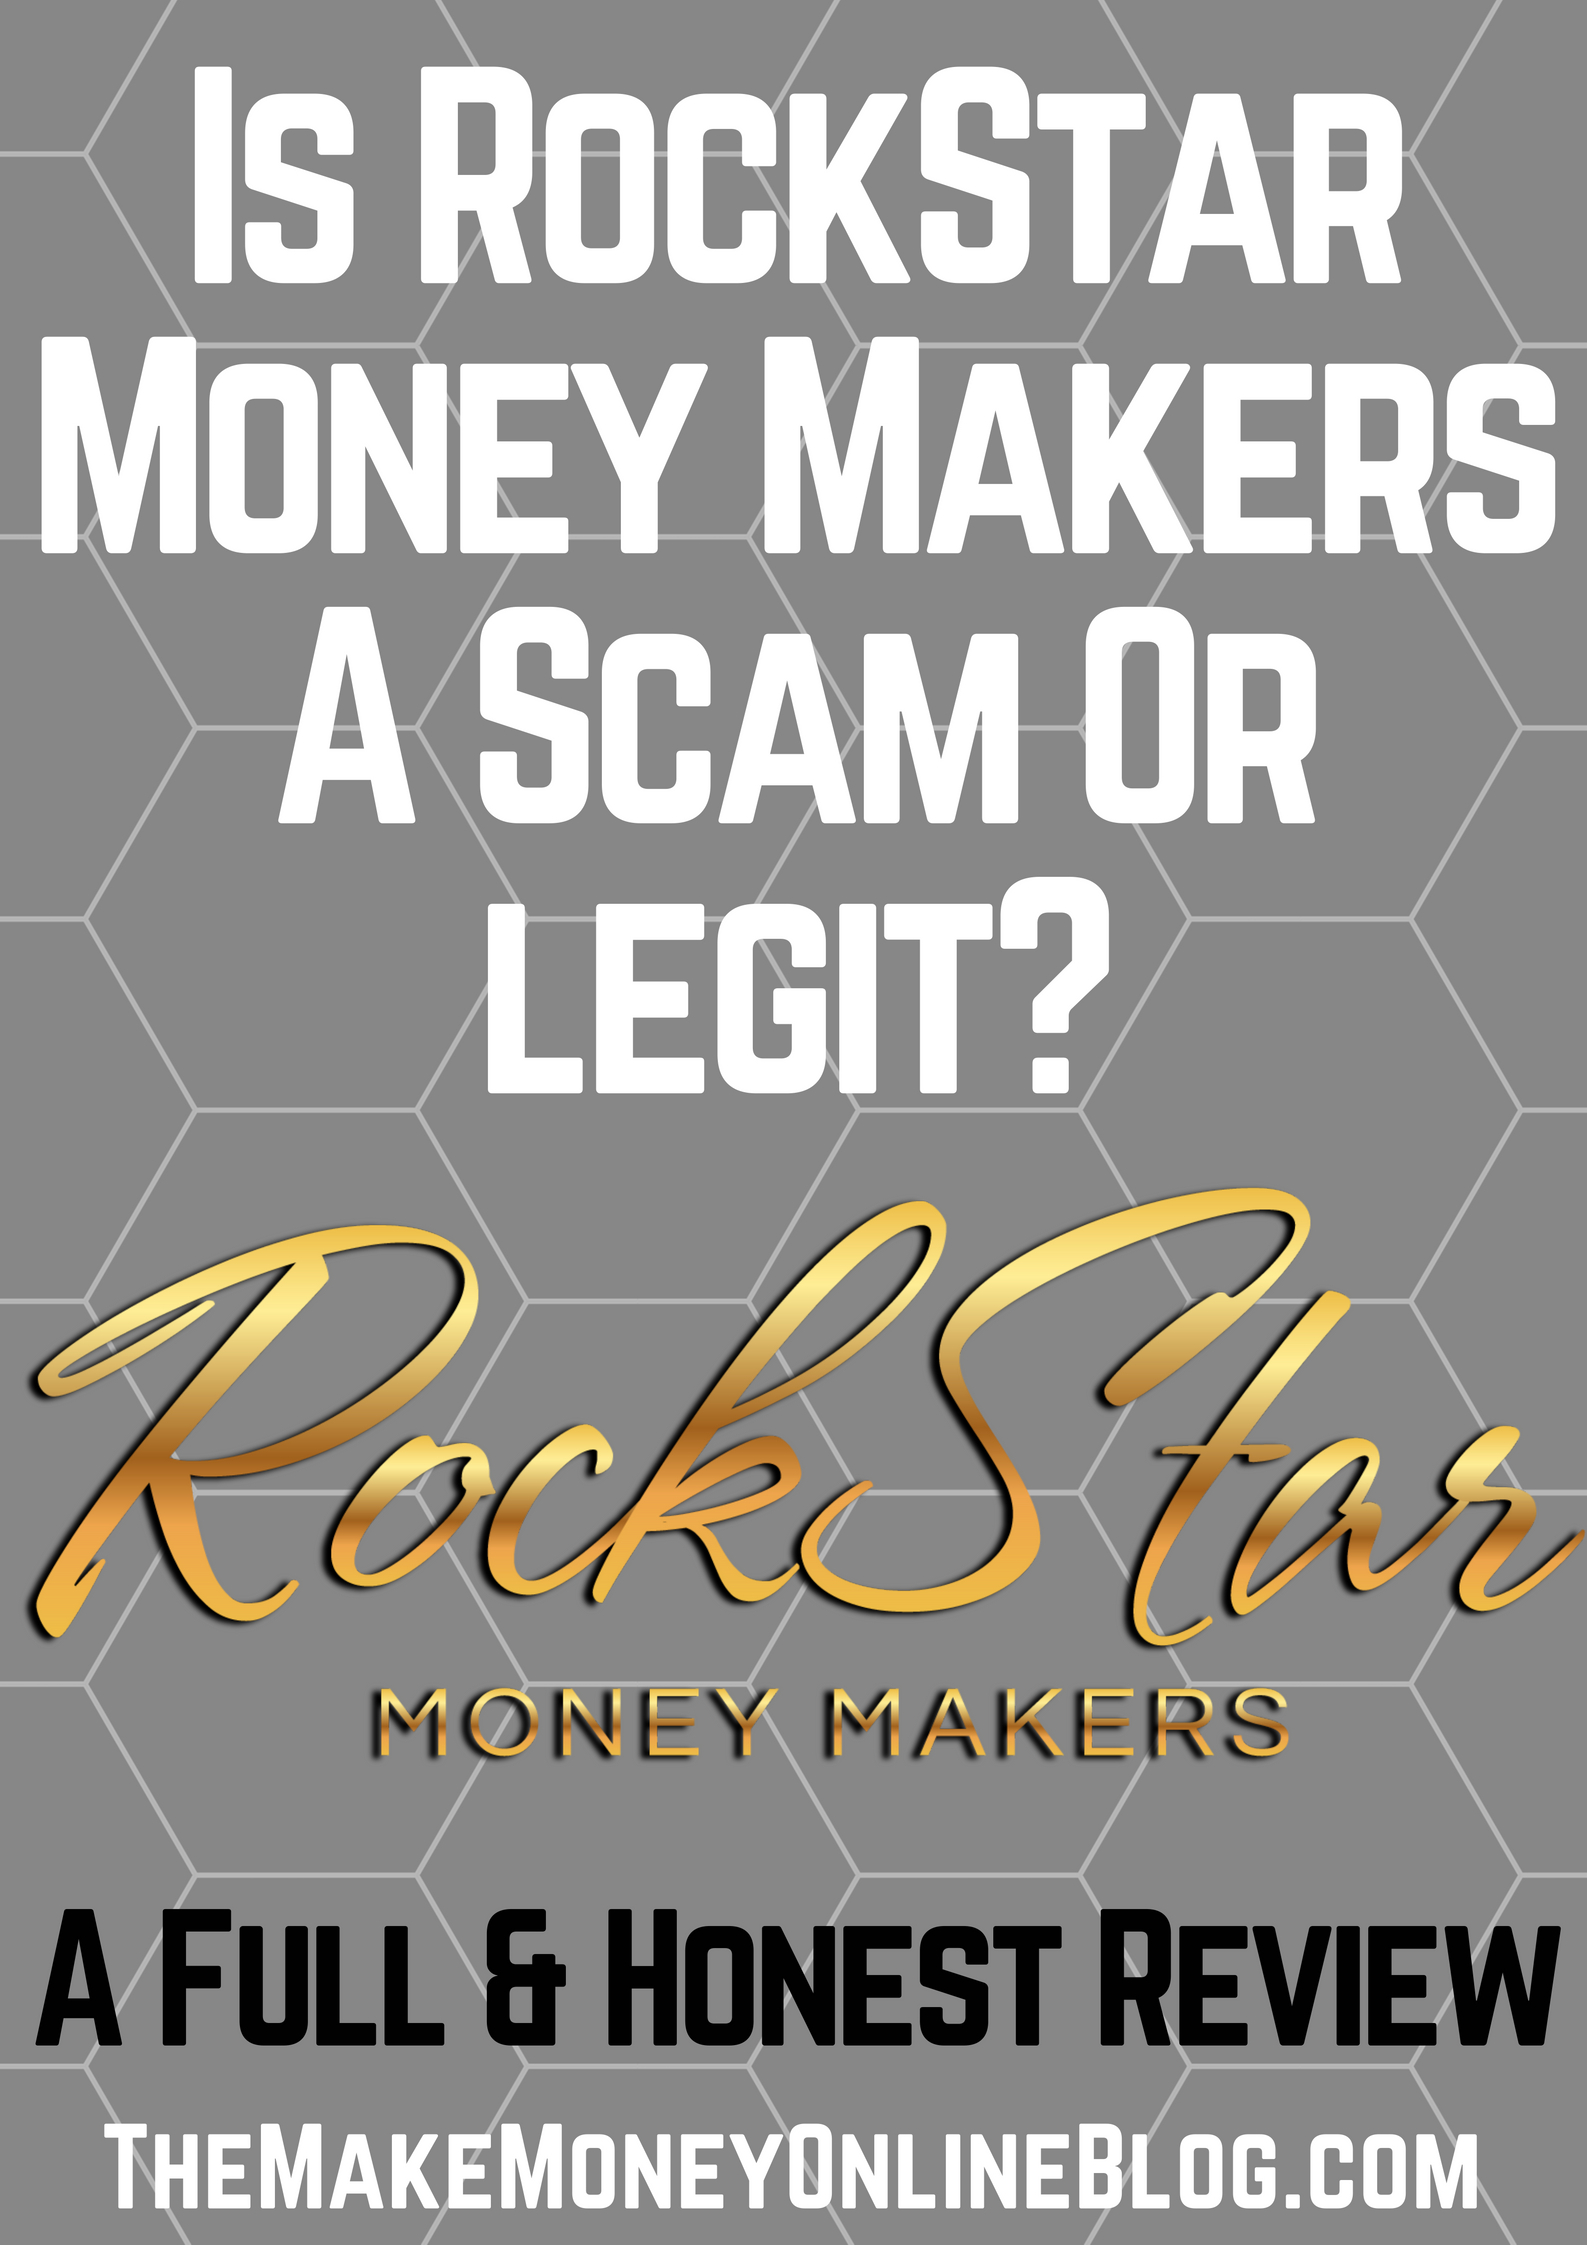 Is Roc!   kstar Money Makers A Scam Read This Before Joining - 